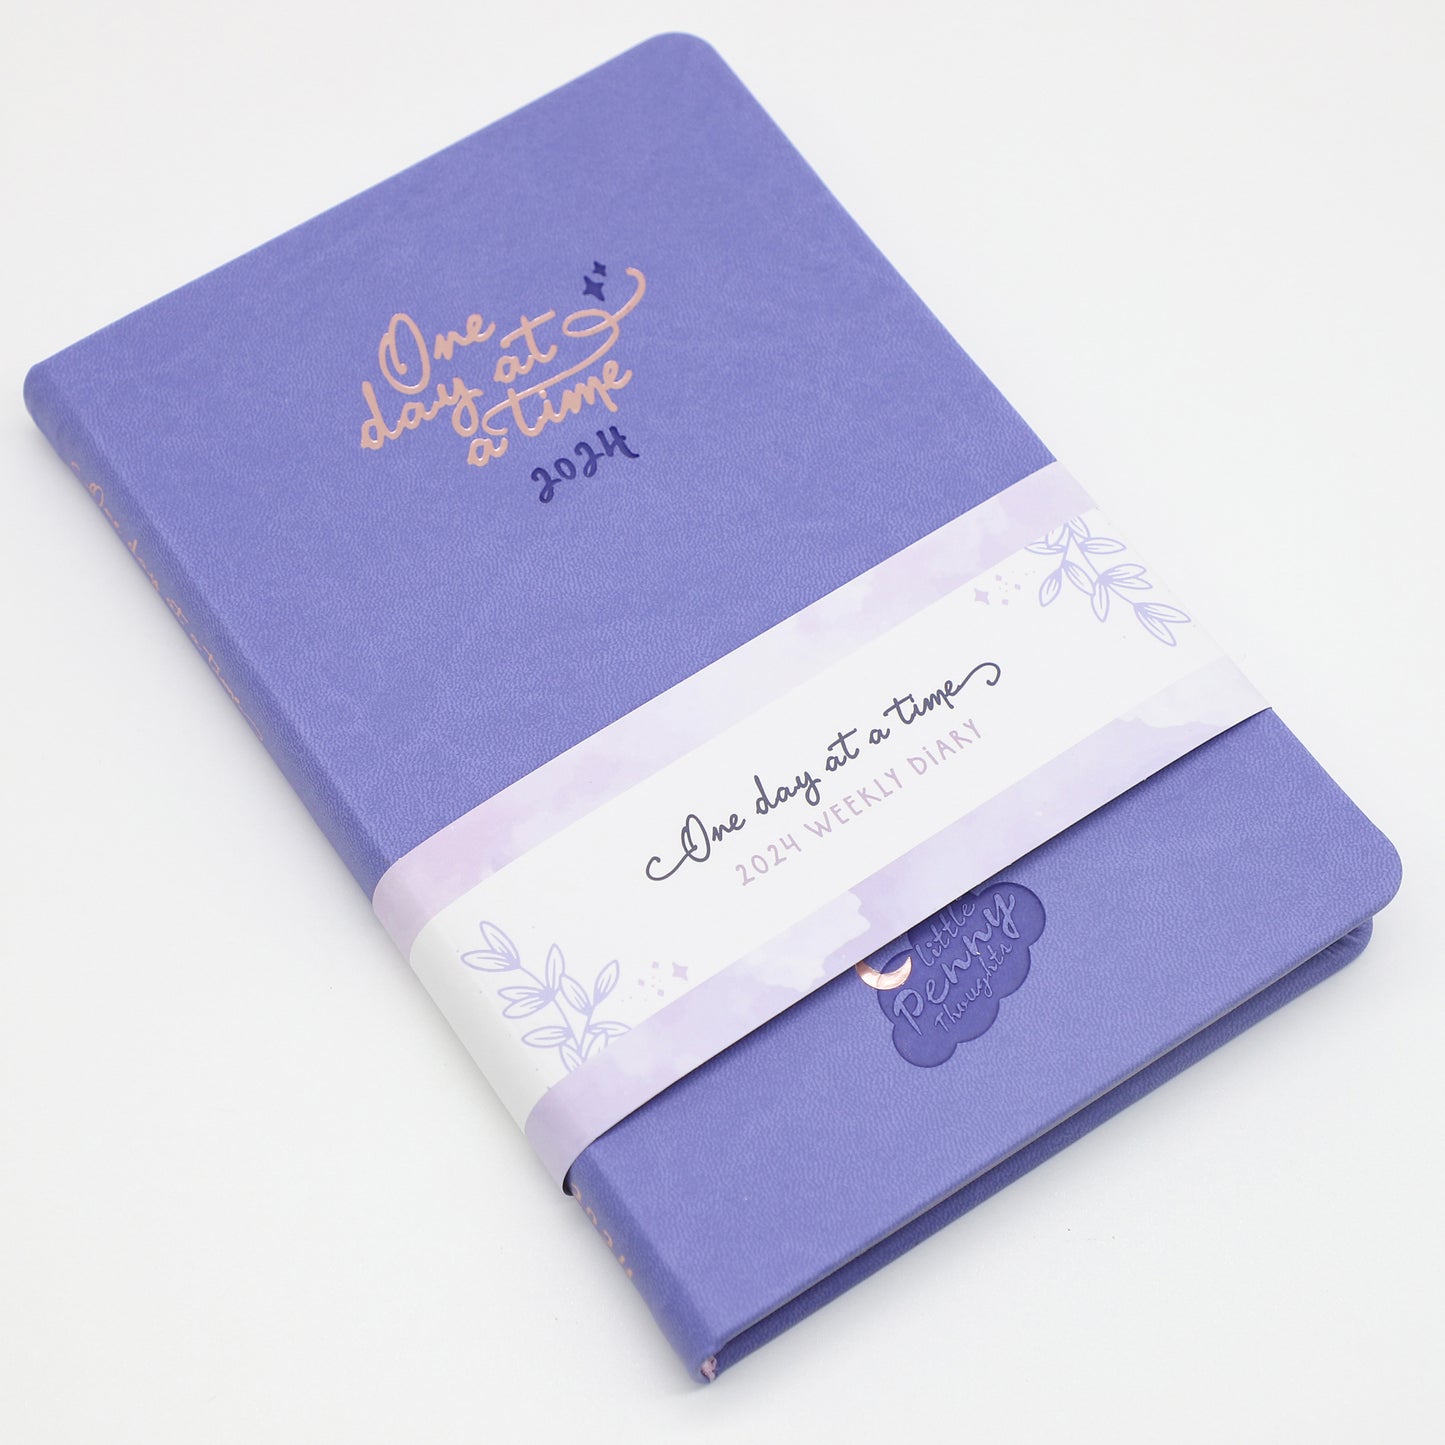 NEW - "One Day At A Time" 2024 Motivational Diary - Productivity Planner